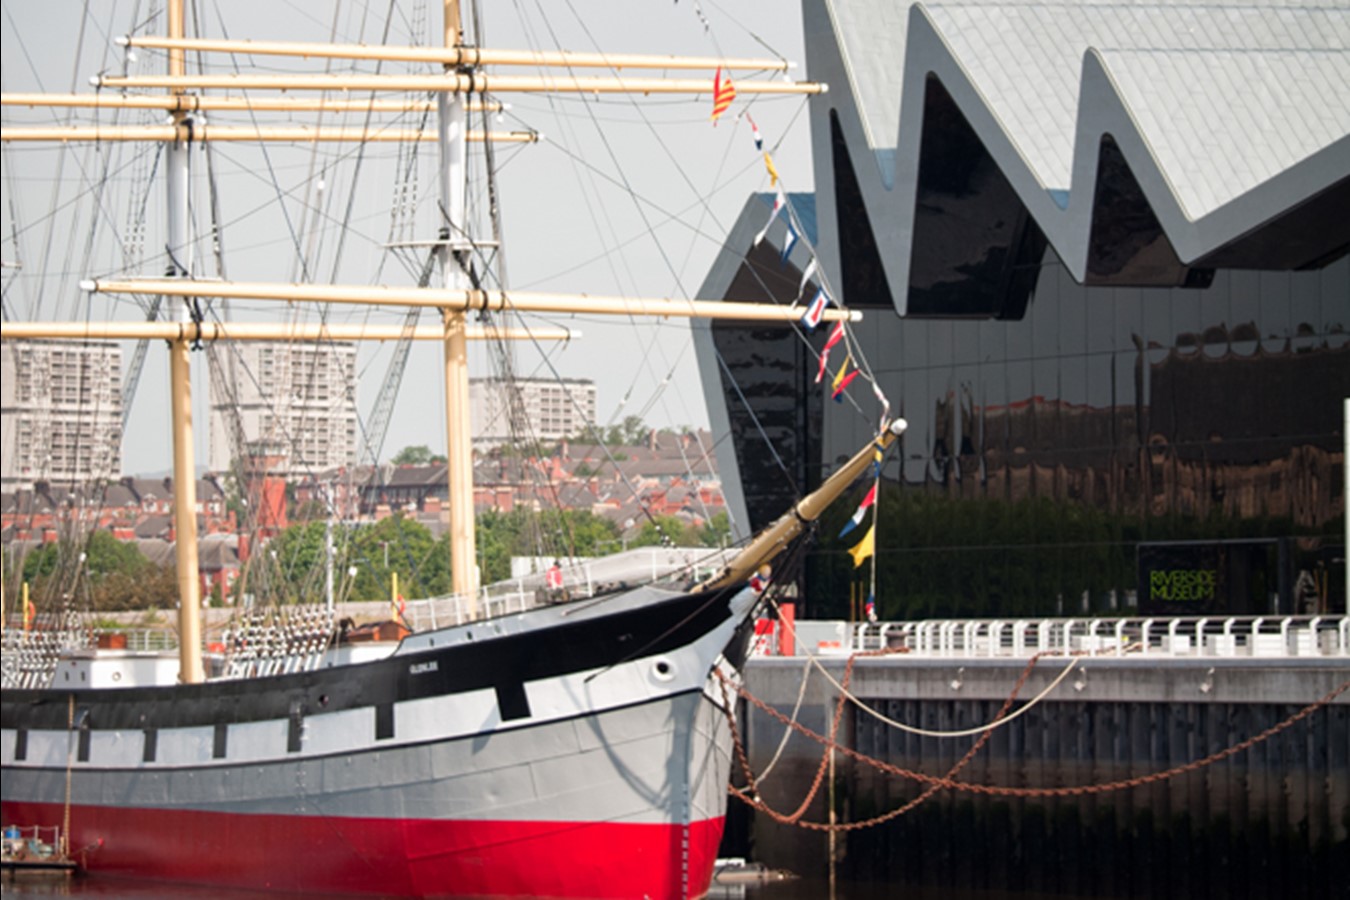 Riverside museum and Tall ship